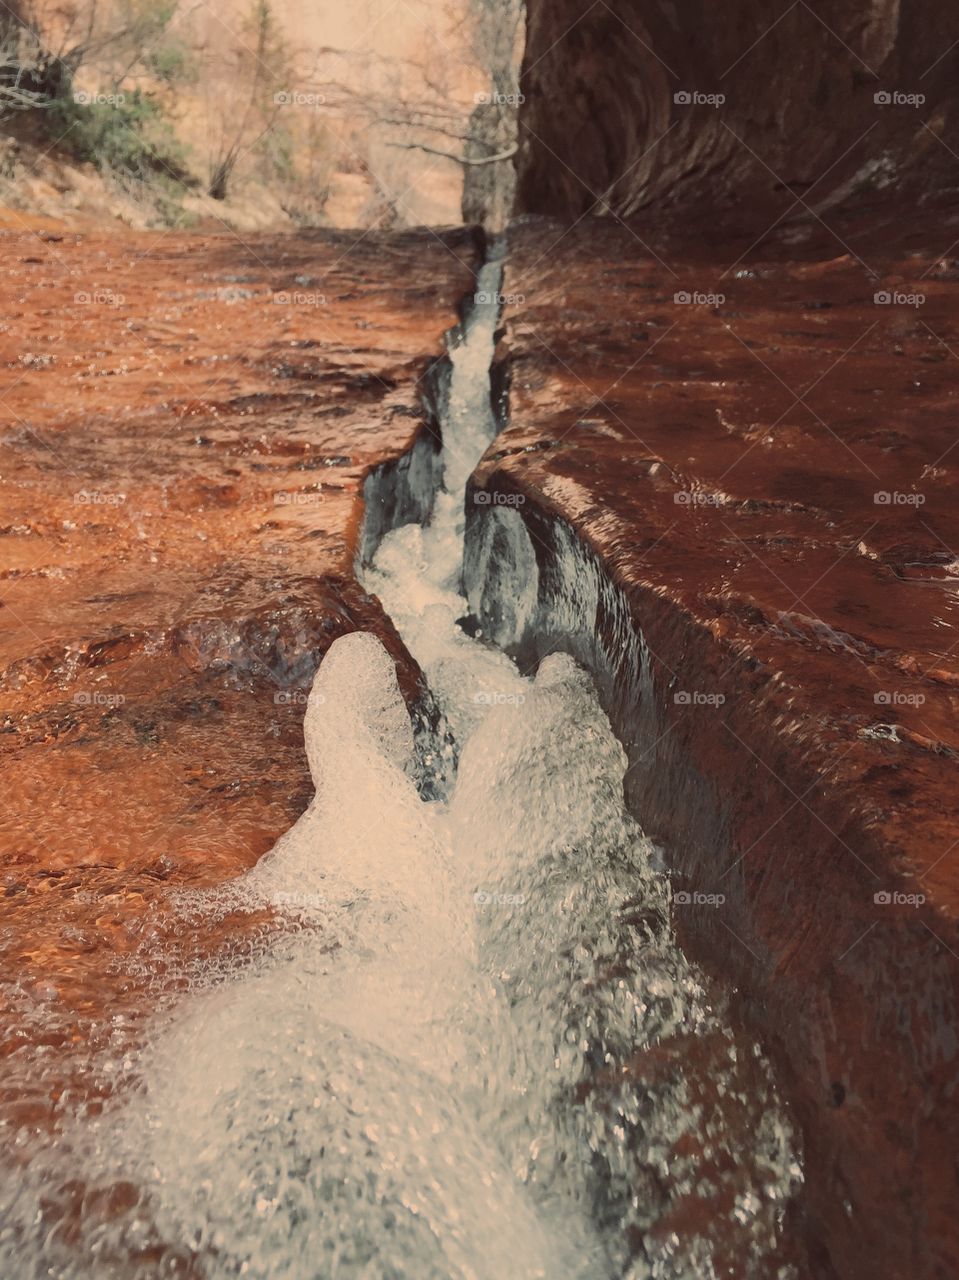 The Stream's Fault. Took this photo on a hike in Zion. The water had split the rock perfectly for about 100 yards